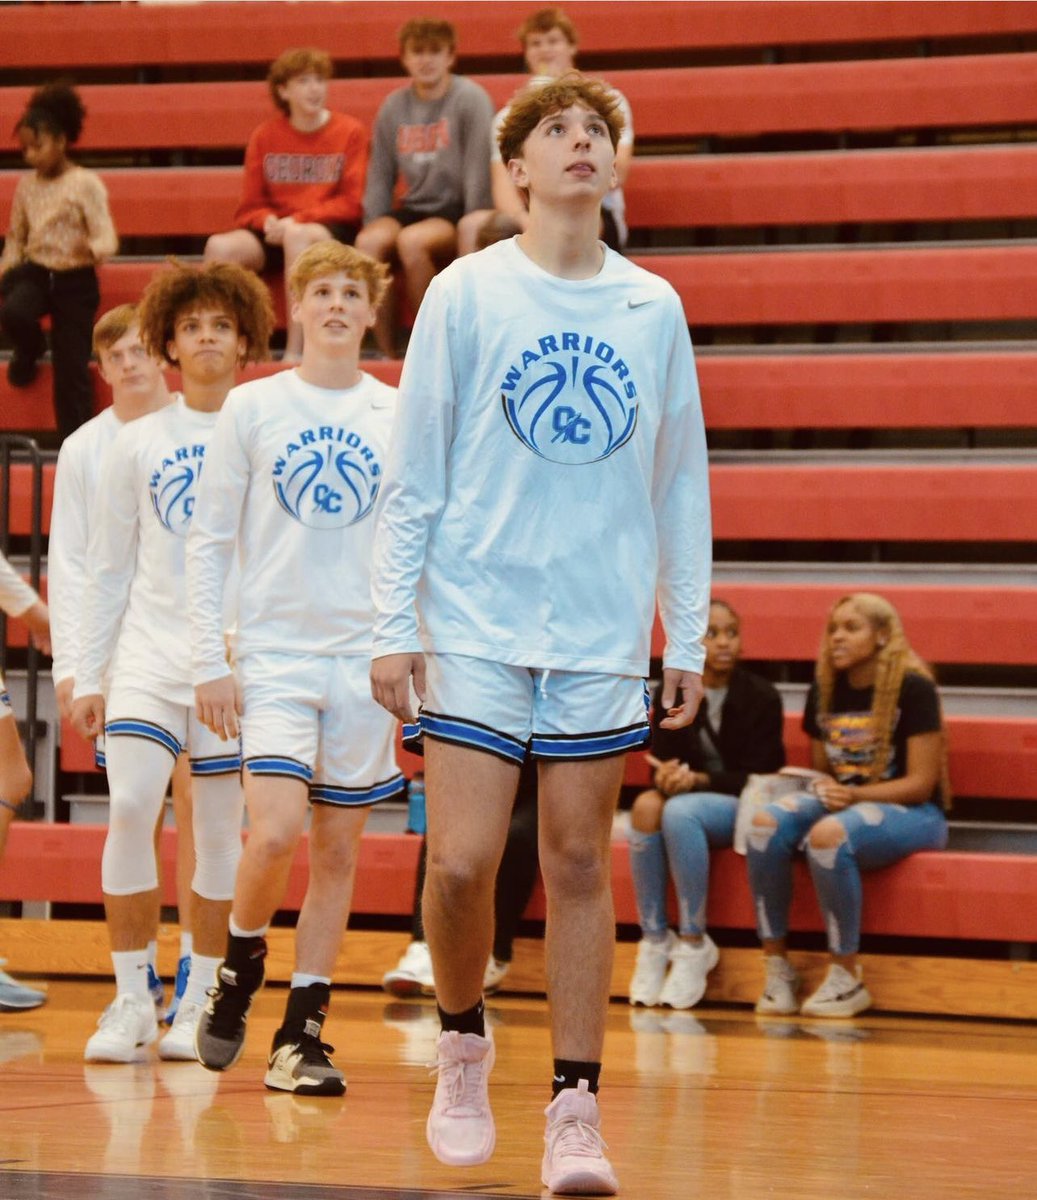 ☁️#PRO Elevation Inc.✈️ ☑️’26 @10grayson10 (Oconee County) is looking forward to taking a huge leap this summer, preparing him for a breakout junior season next year 🏀Shooting guard with an impressive offensive arsenal and efficient sniper @Bonafyde5 🎥Sophomore Highlights⤵️